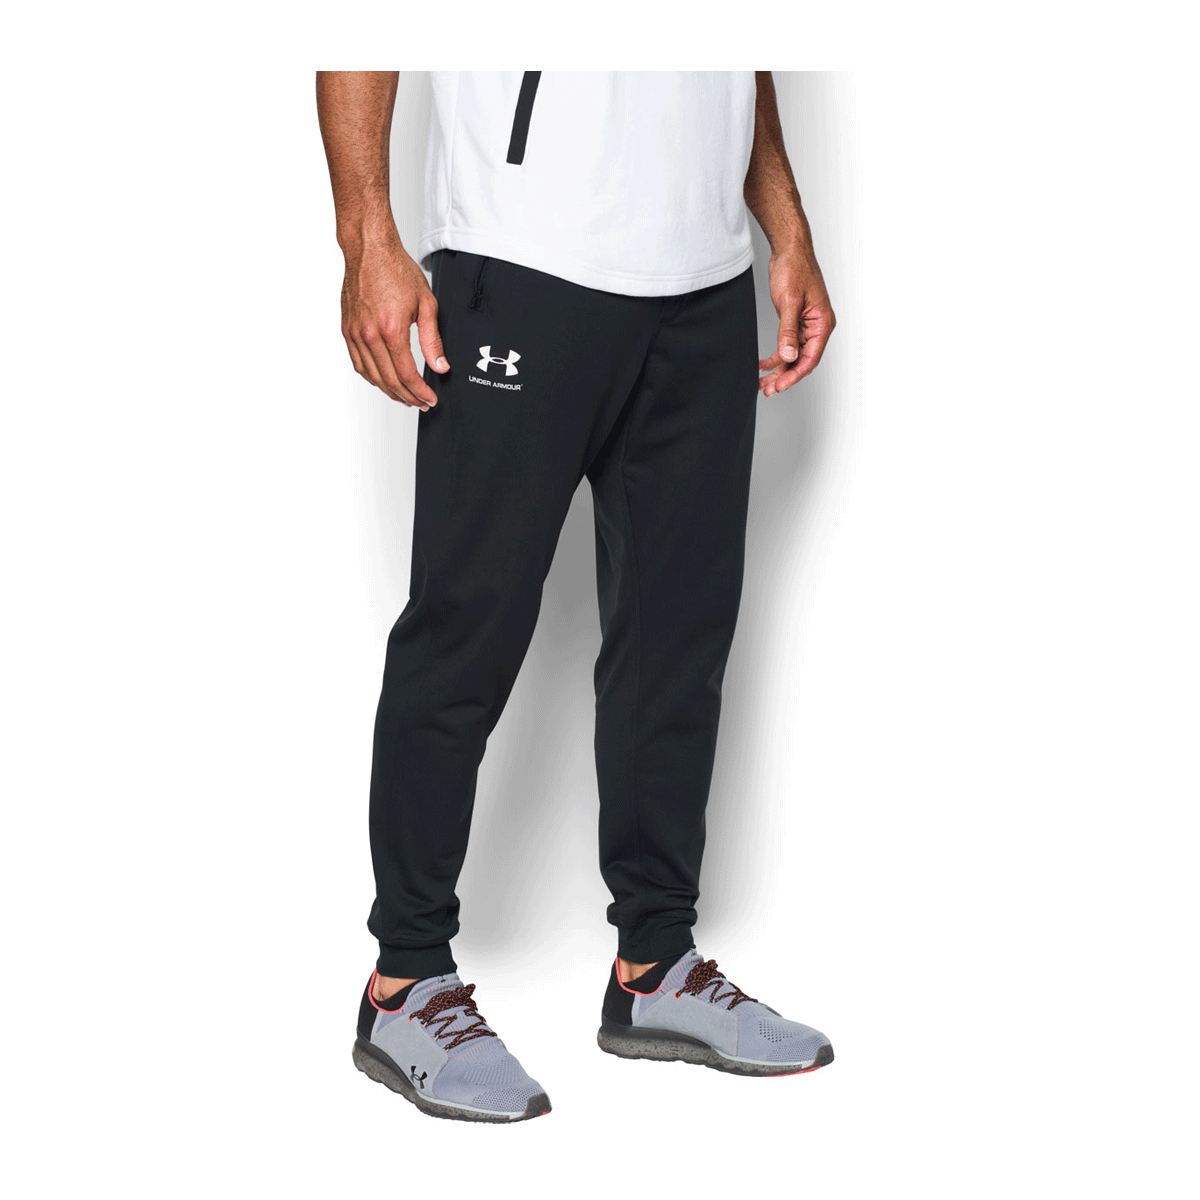 Under Armour Mens Sportstyle Track Pants Rebel Sport